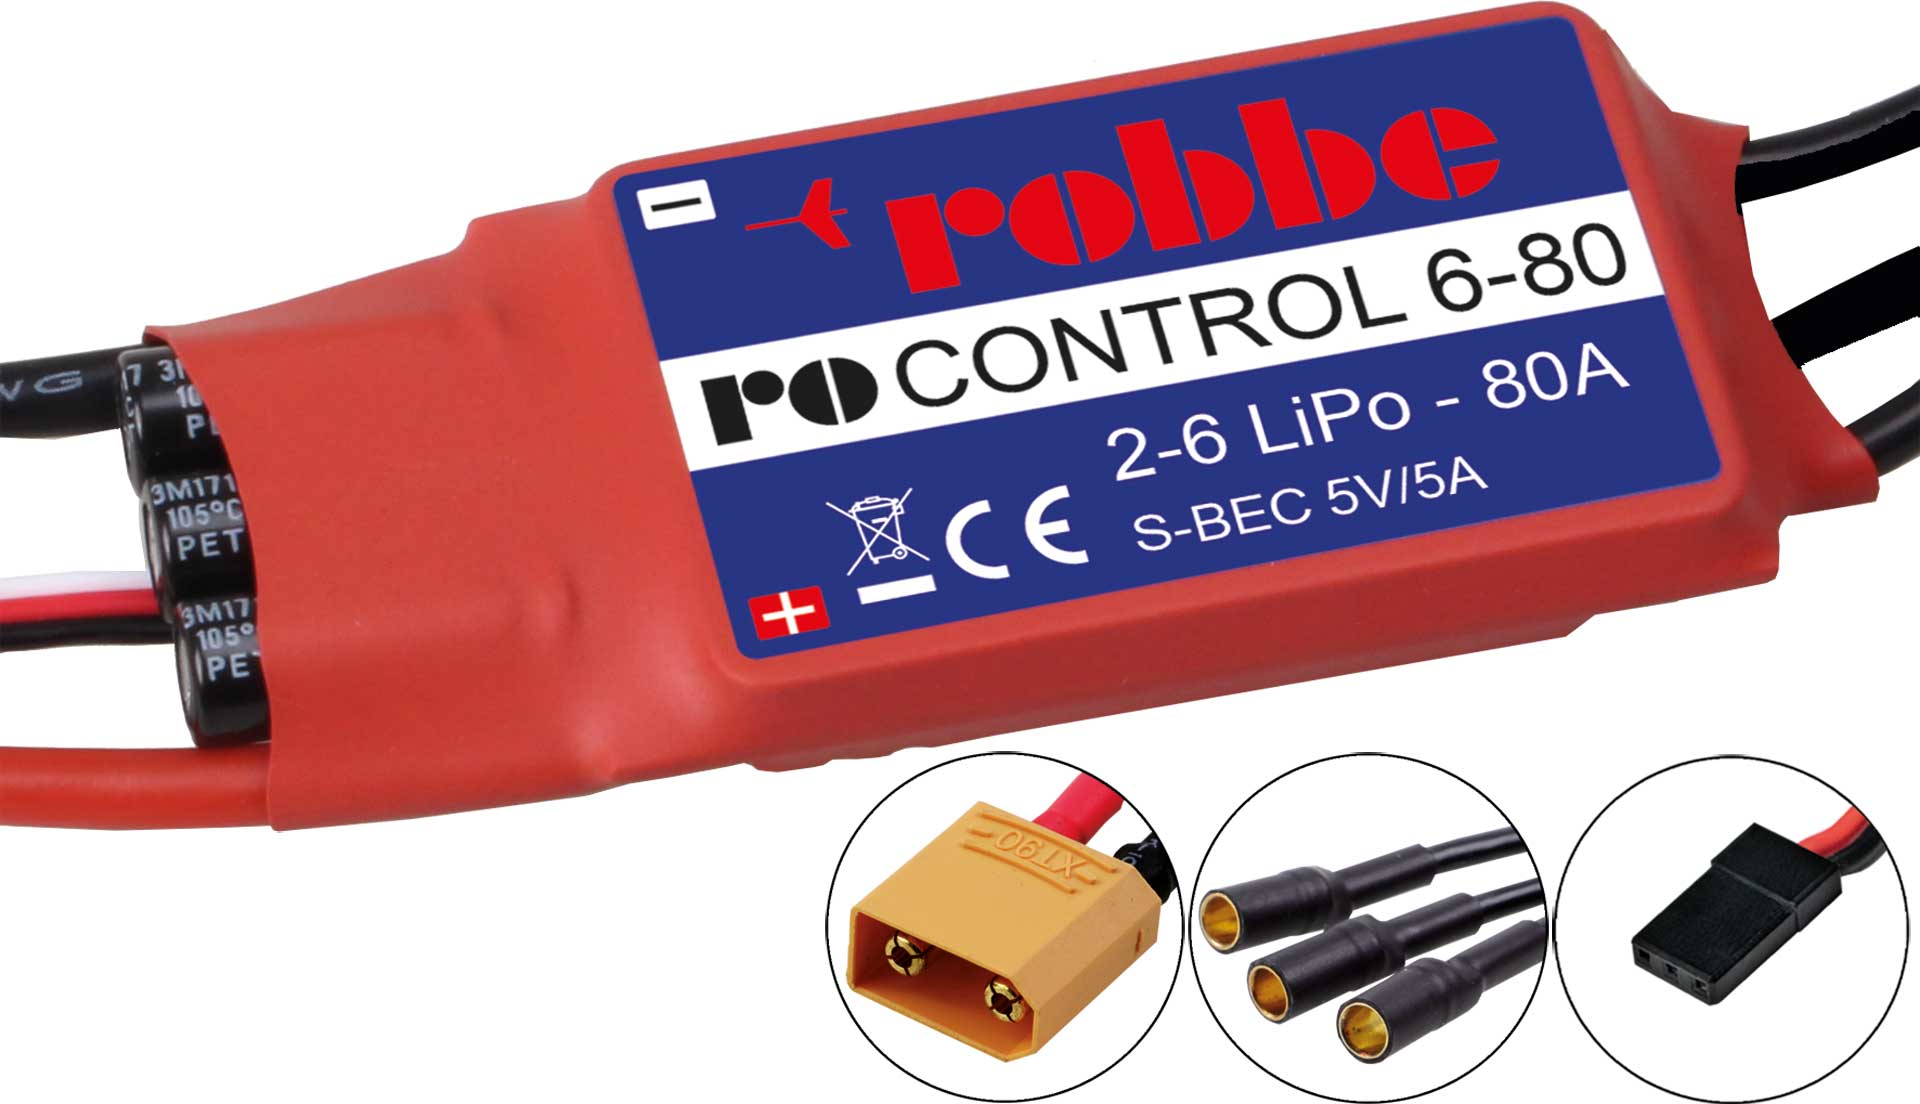 Robbe Modellsport RO-CONTROL 6-80 2-6S -80(100A) BL CONTROLLER 5V/5A SWITCH-BEC